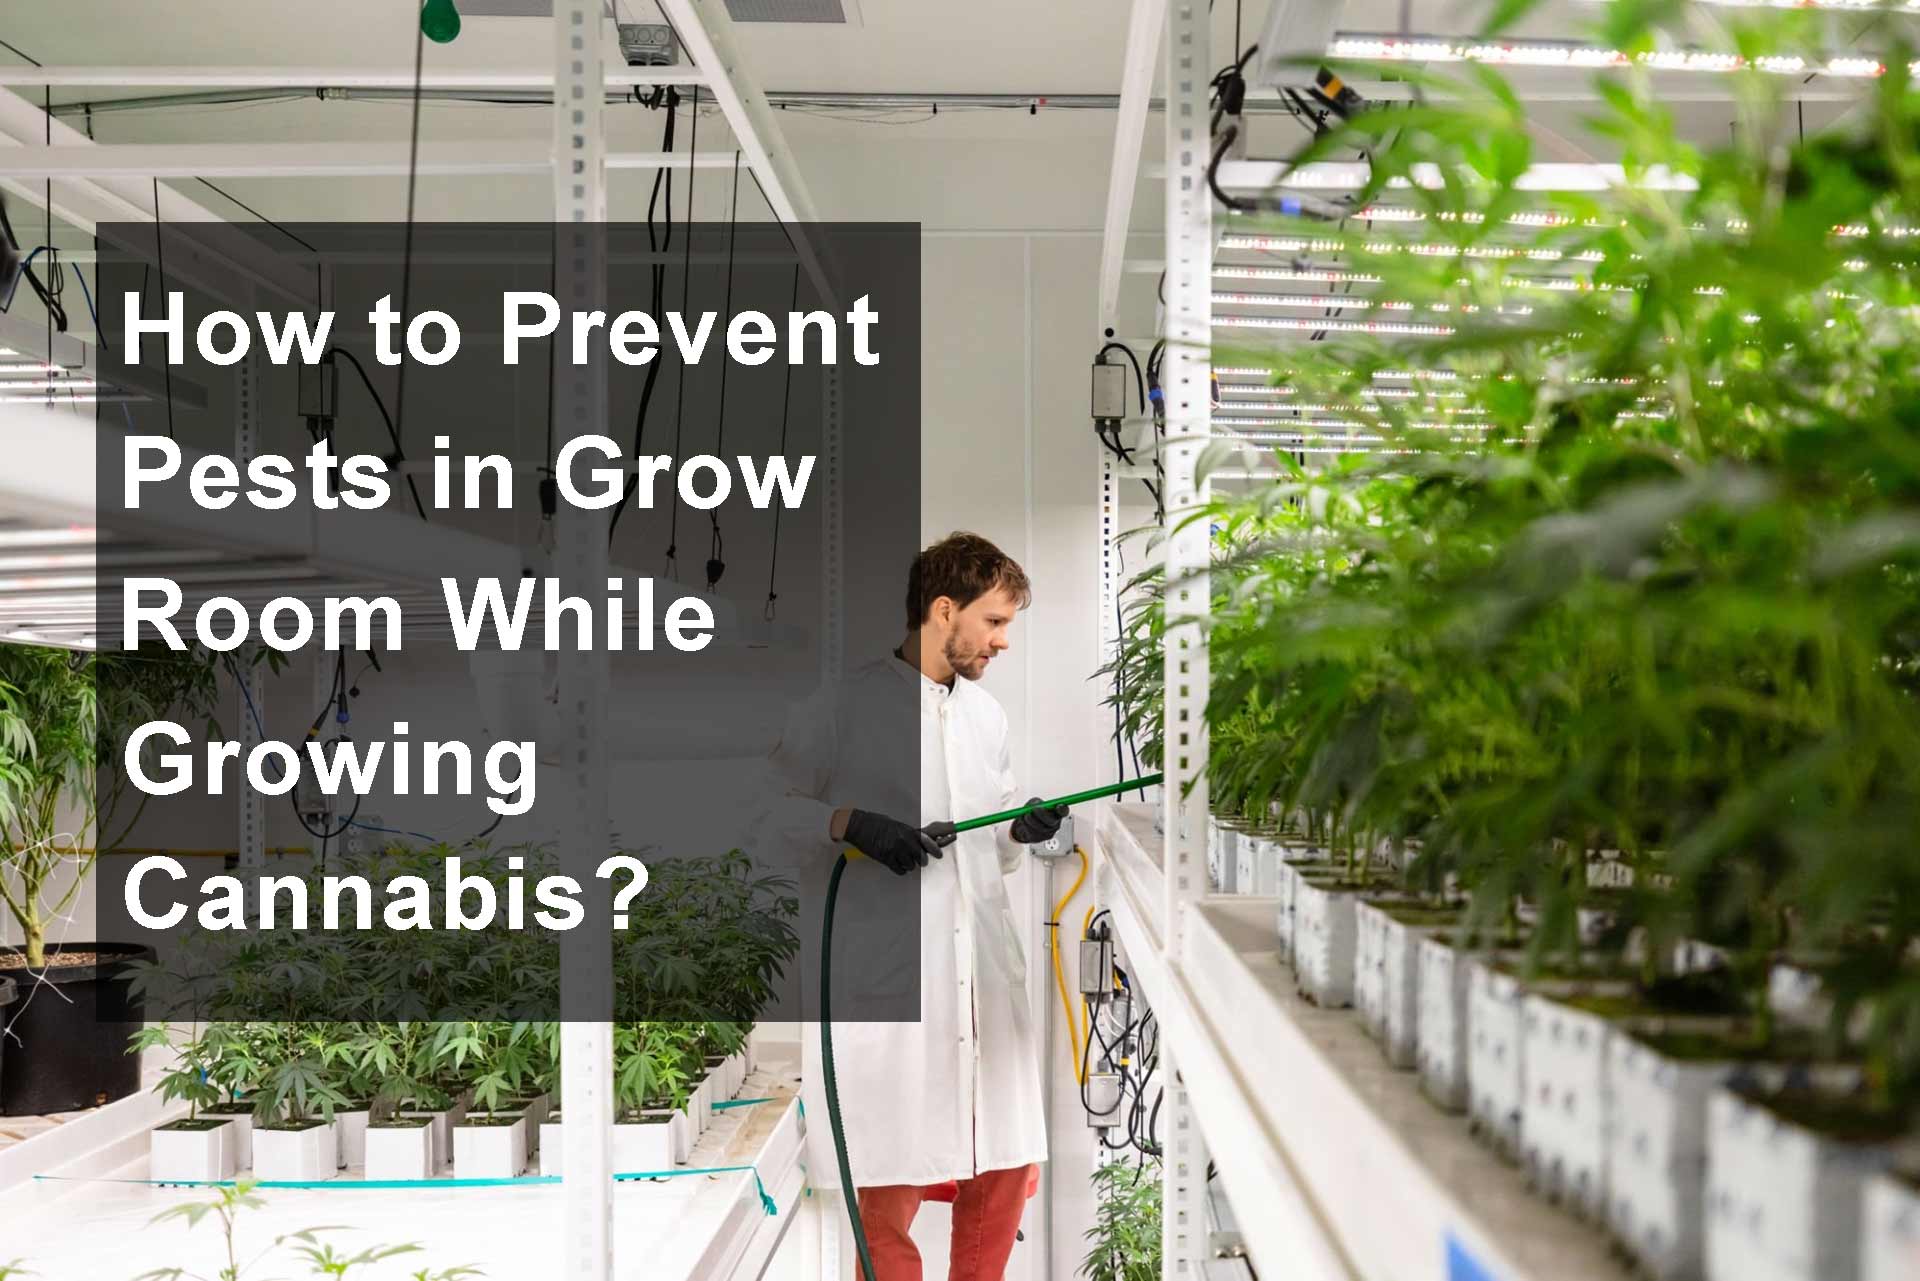 How to Prevent Pests in Grow Room While Growing Cannabis?